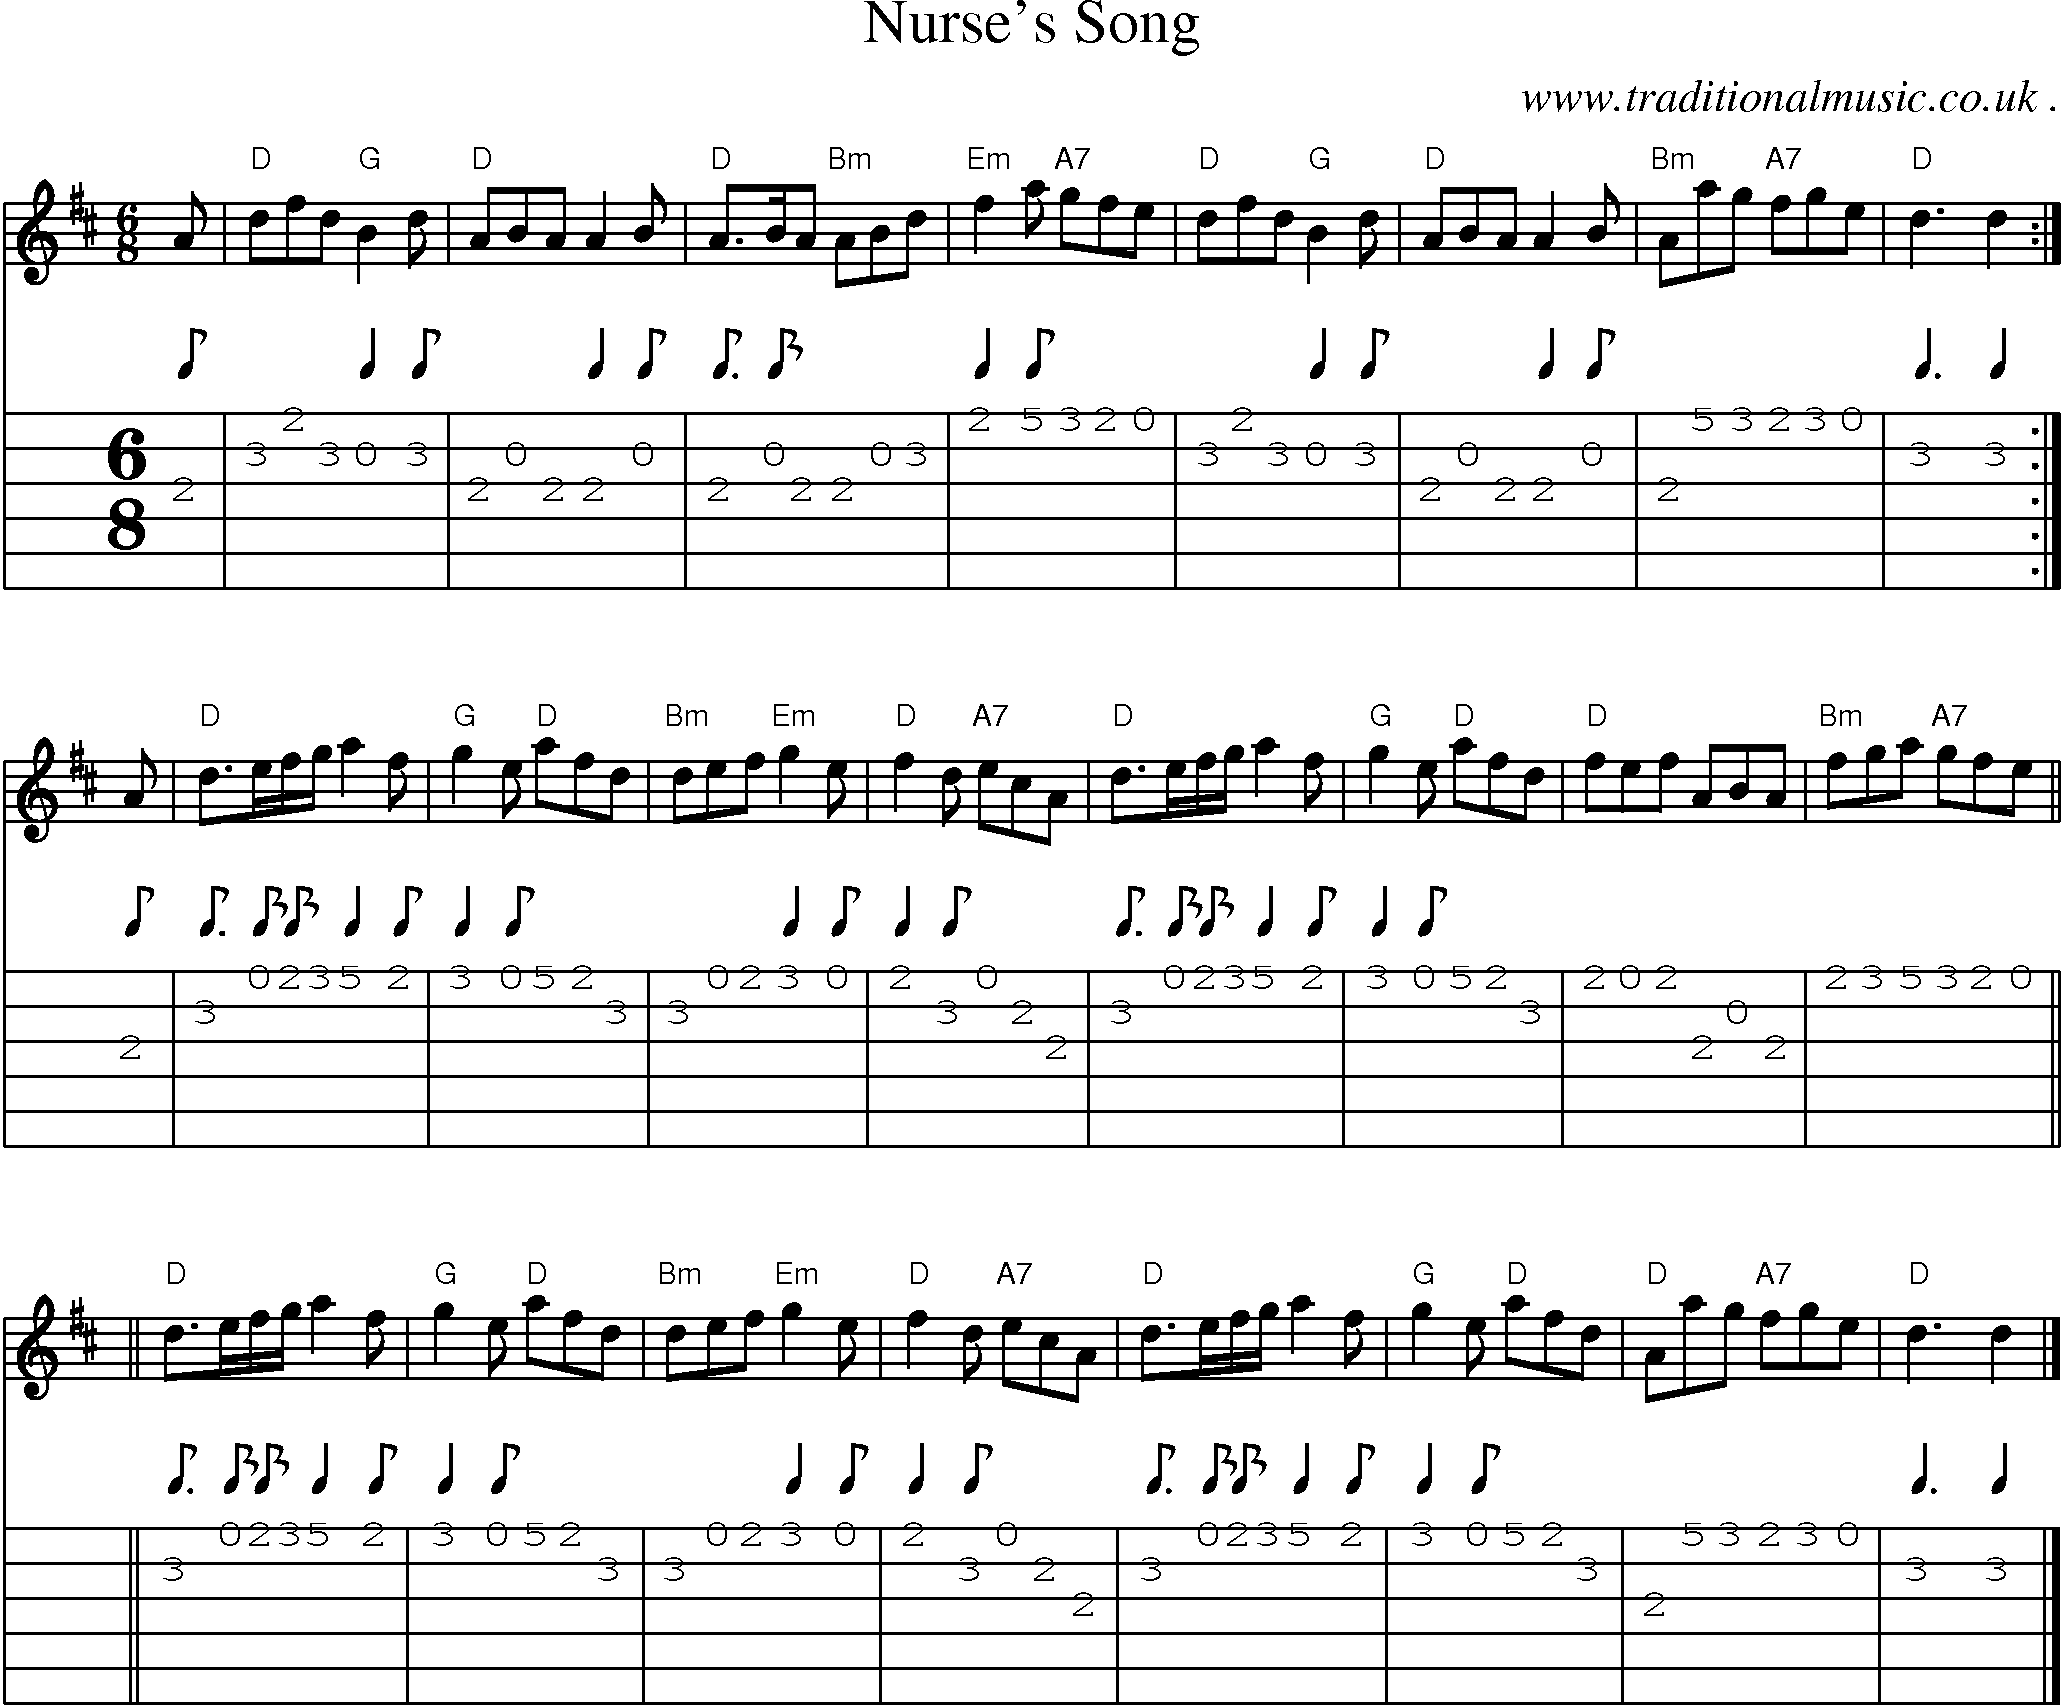 Sheet-music  score, Chords and Guitar Tabs for Nurses Song